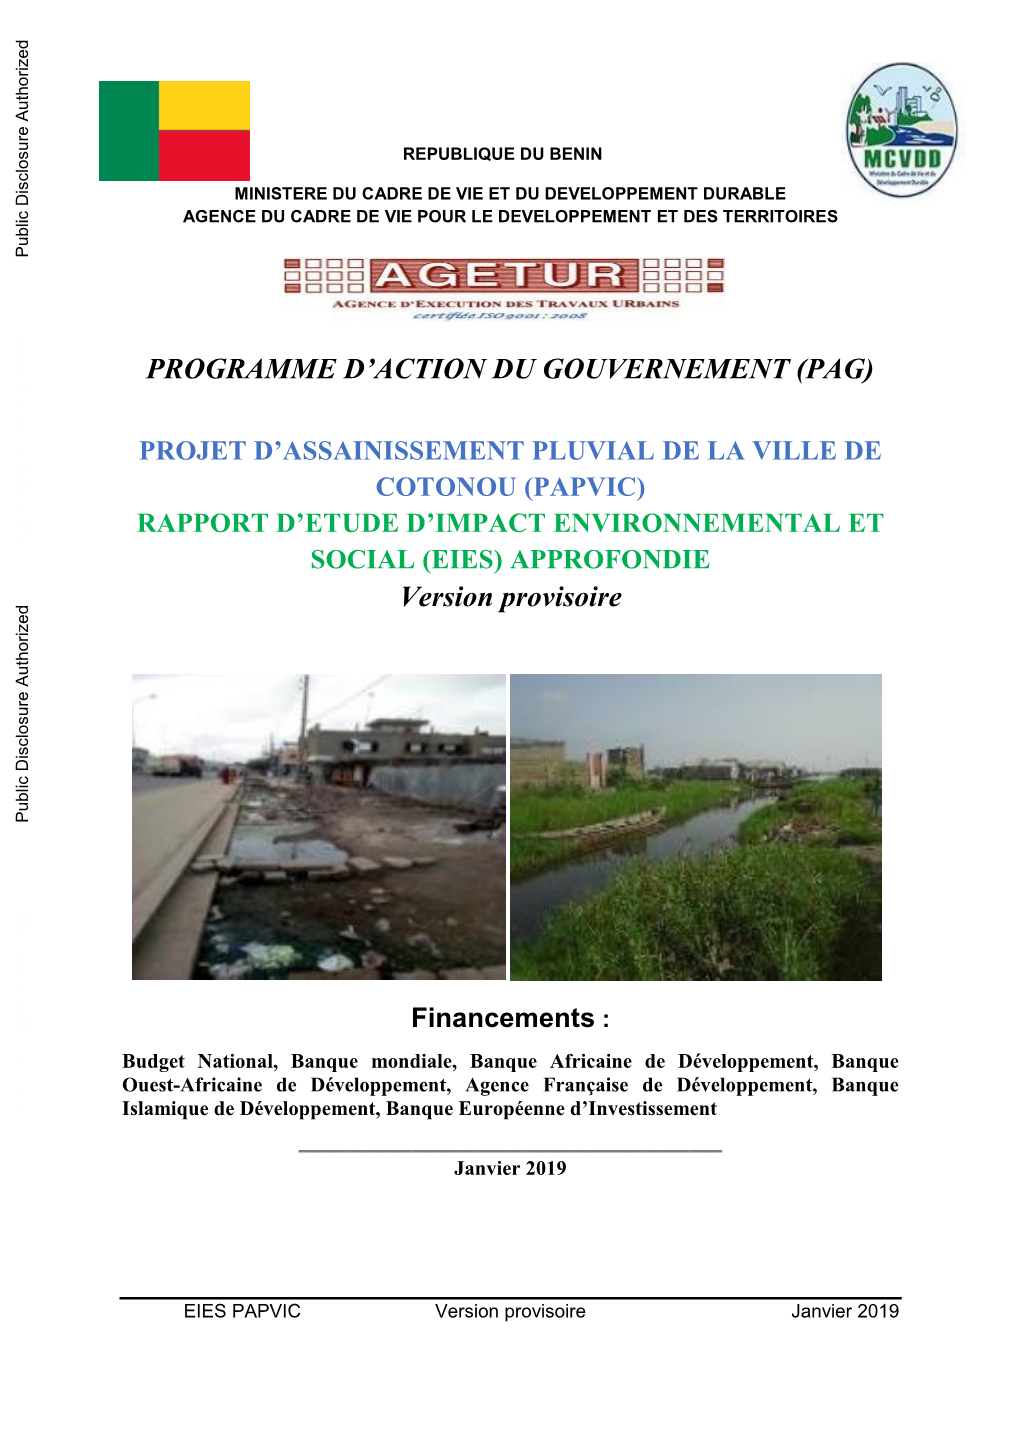 Rapport-EIES-PAPVIC-22-01-19.Pdf